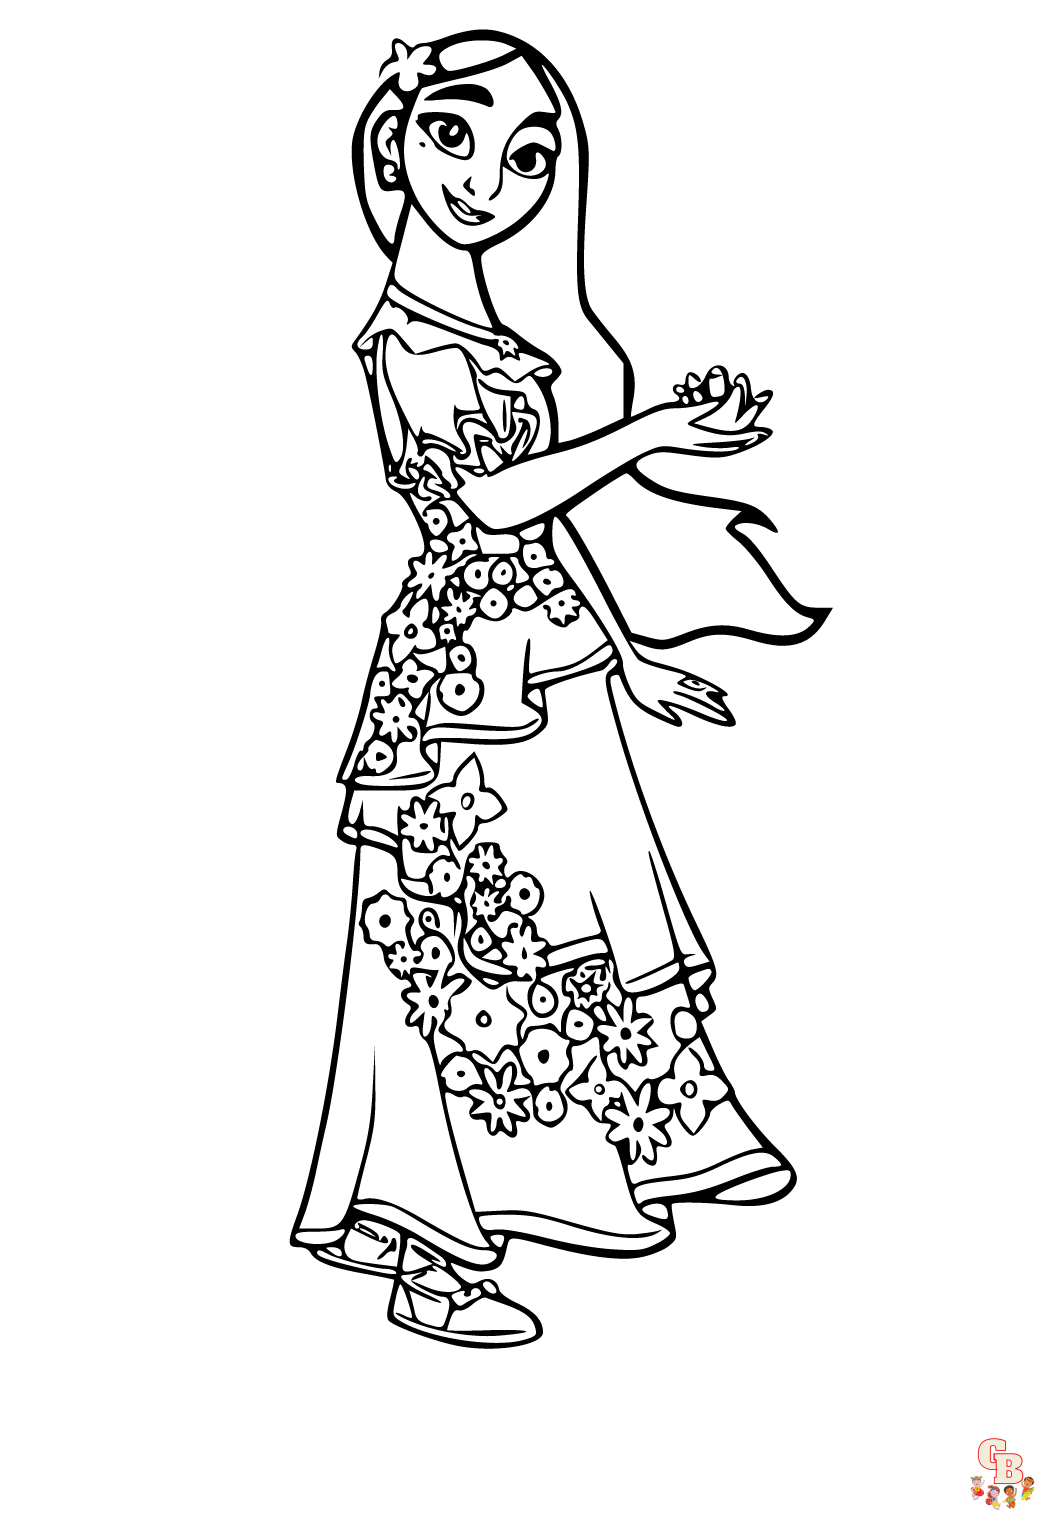 Printable Isabela Encanto Coloring Pages - GBcoloring